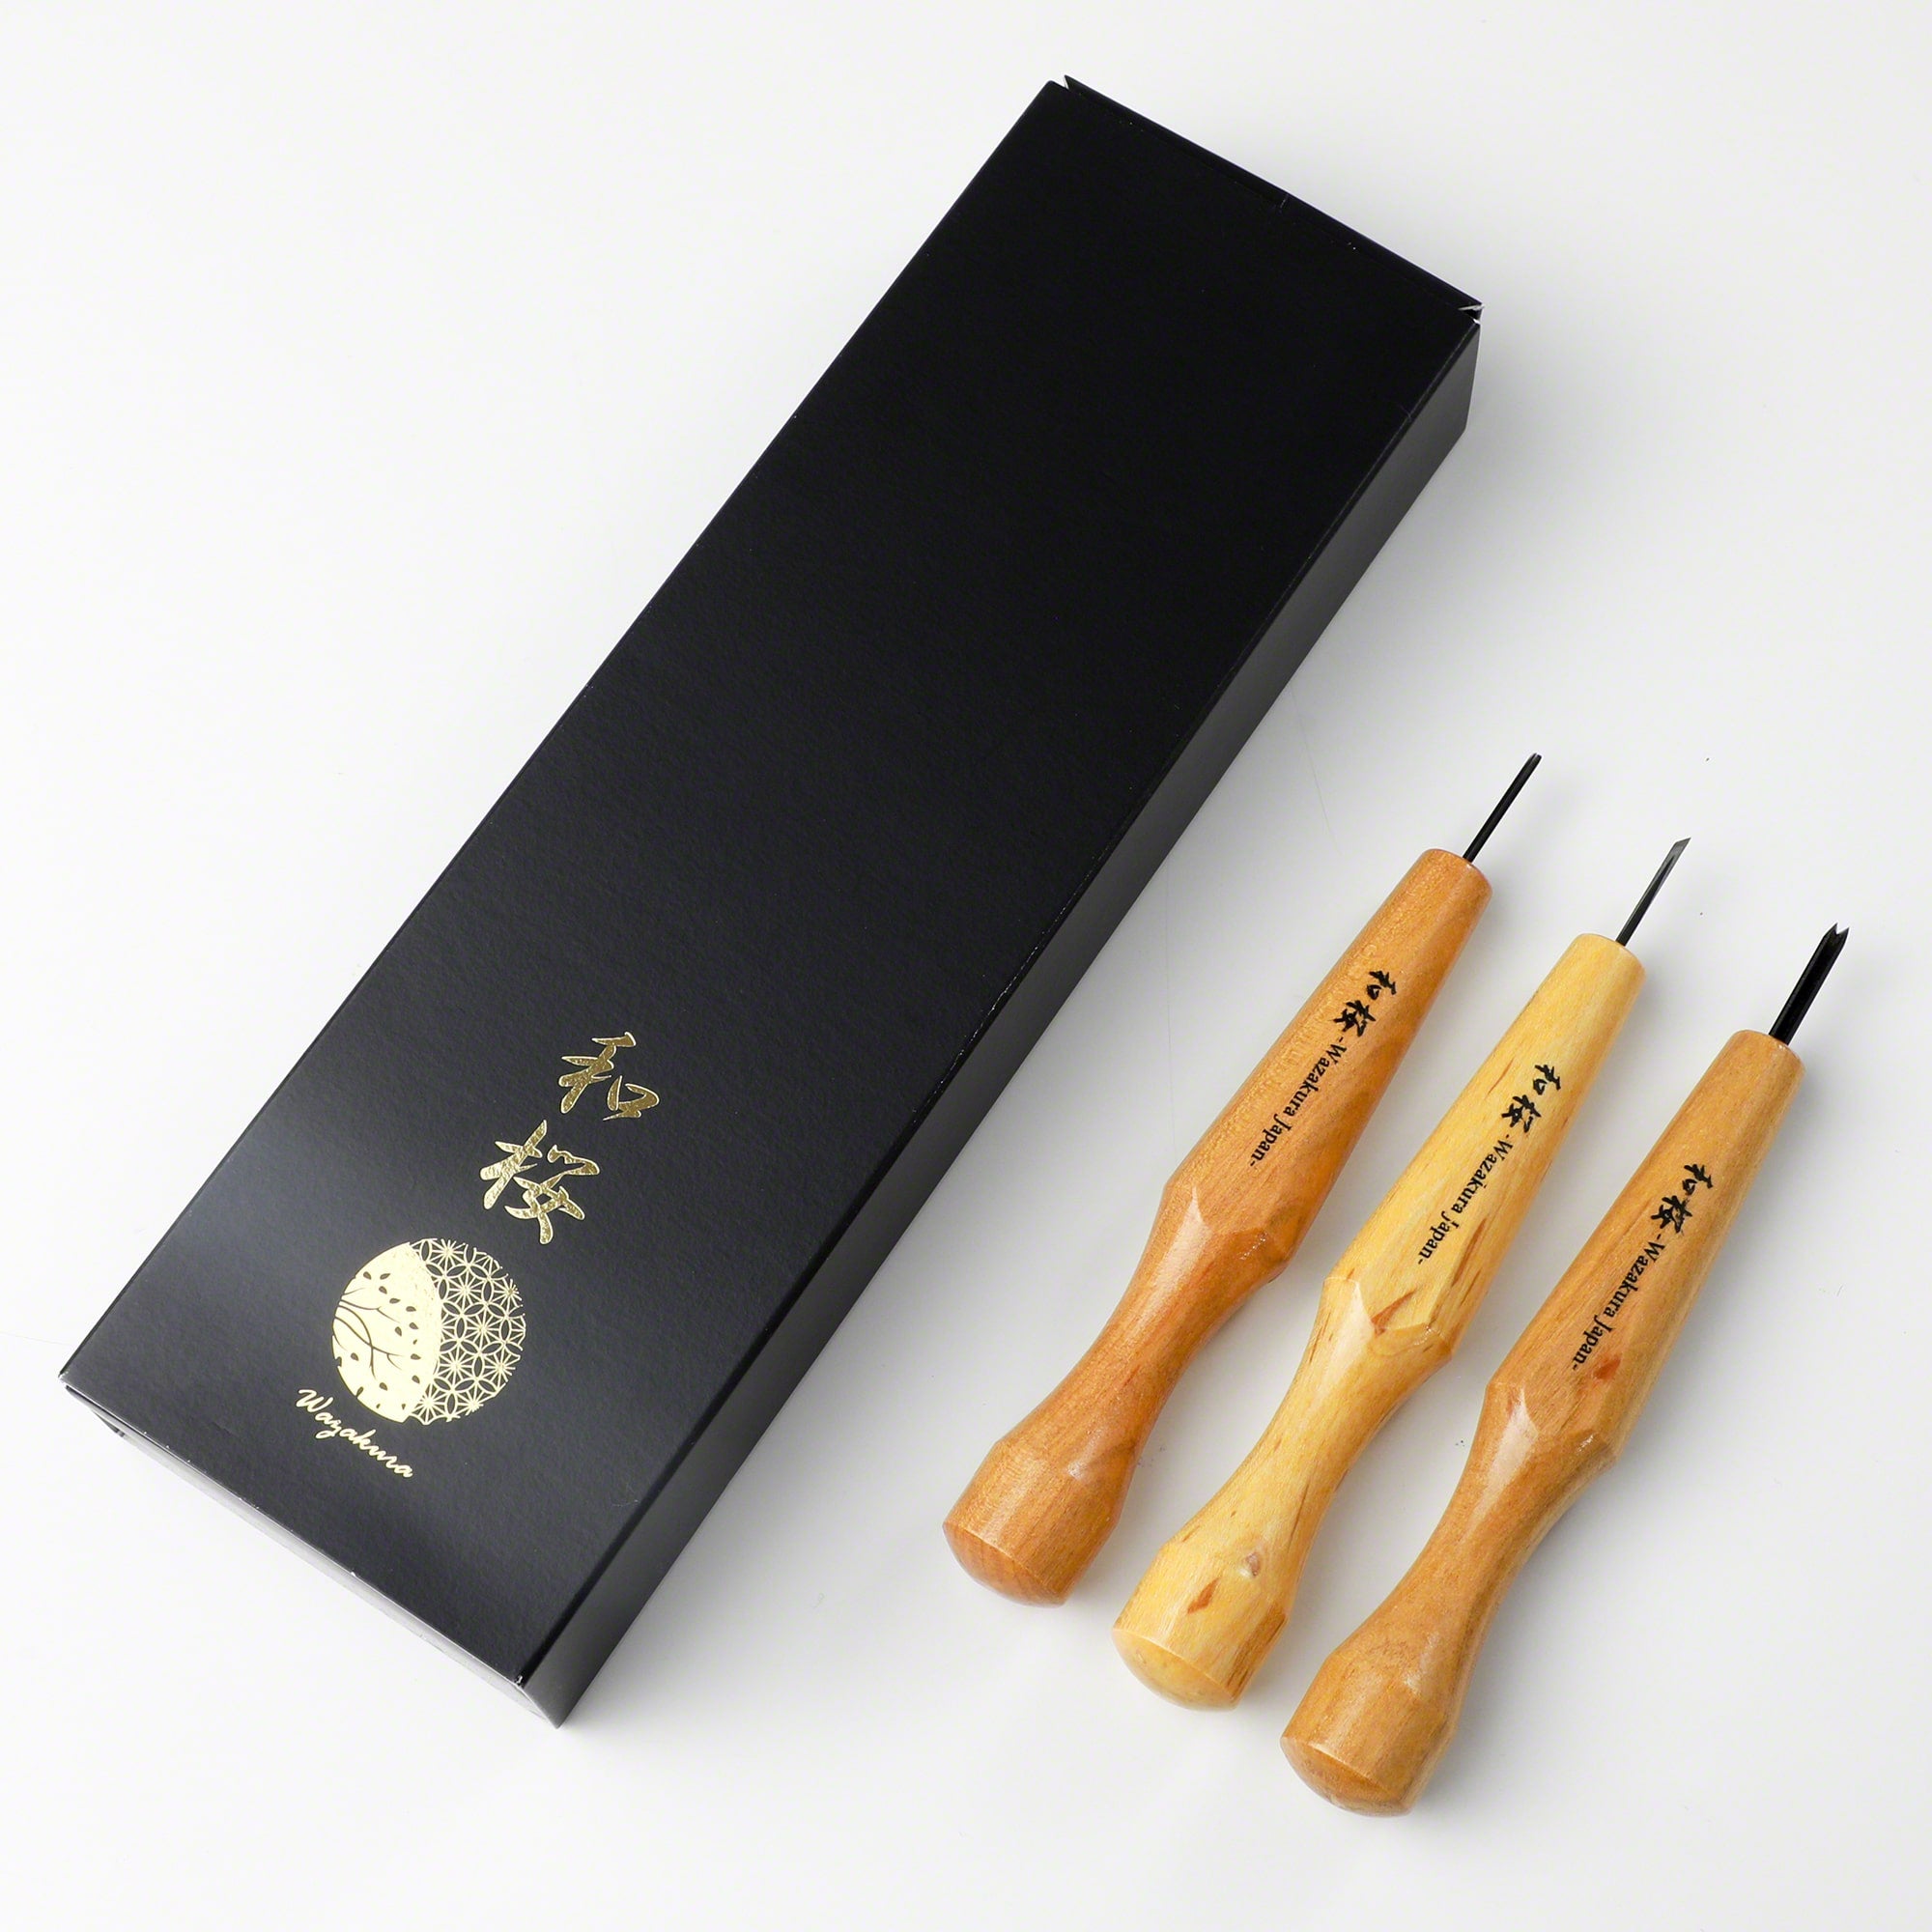 Mikisyo POWER GRIP Wood Carving Chisels & Gouges, 5 Pieces Set, Made in  Japan 